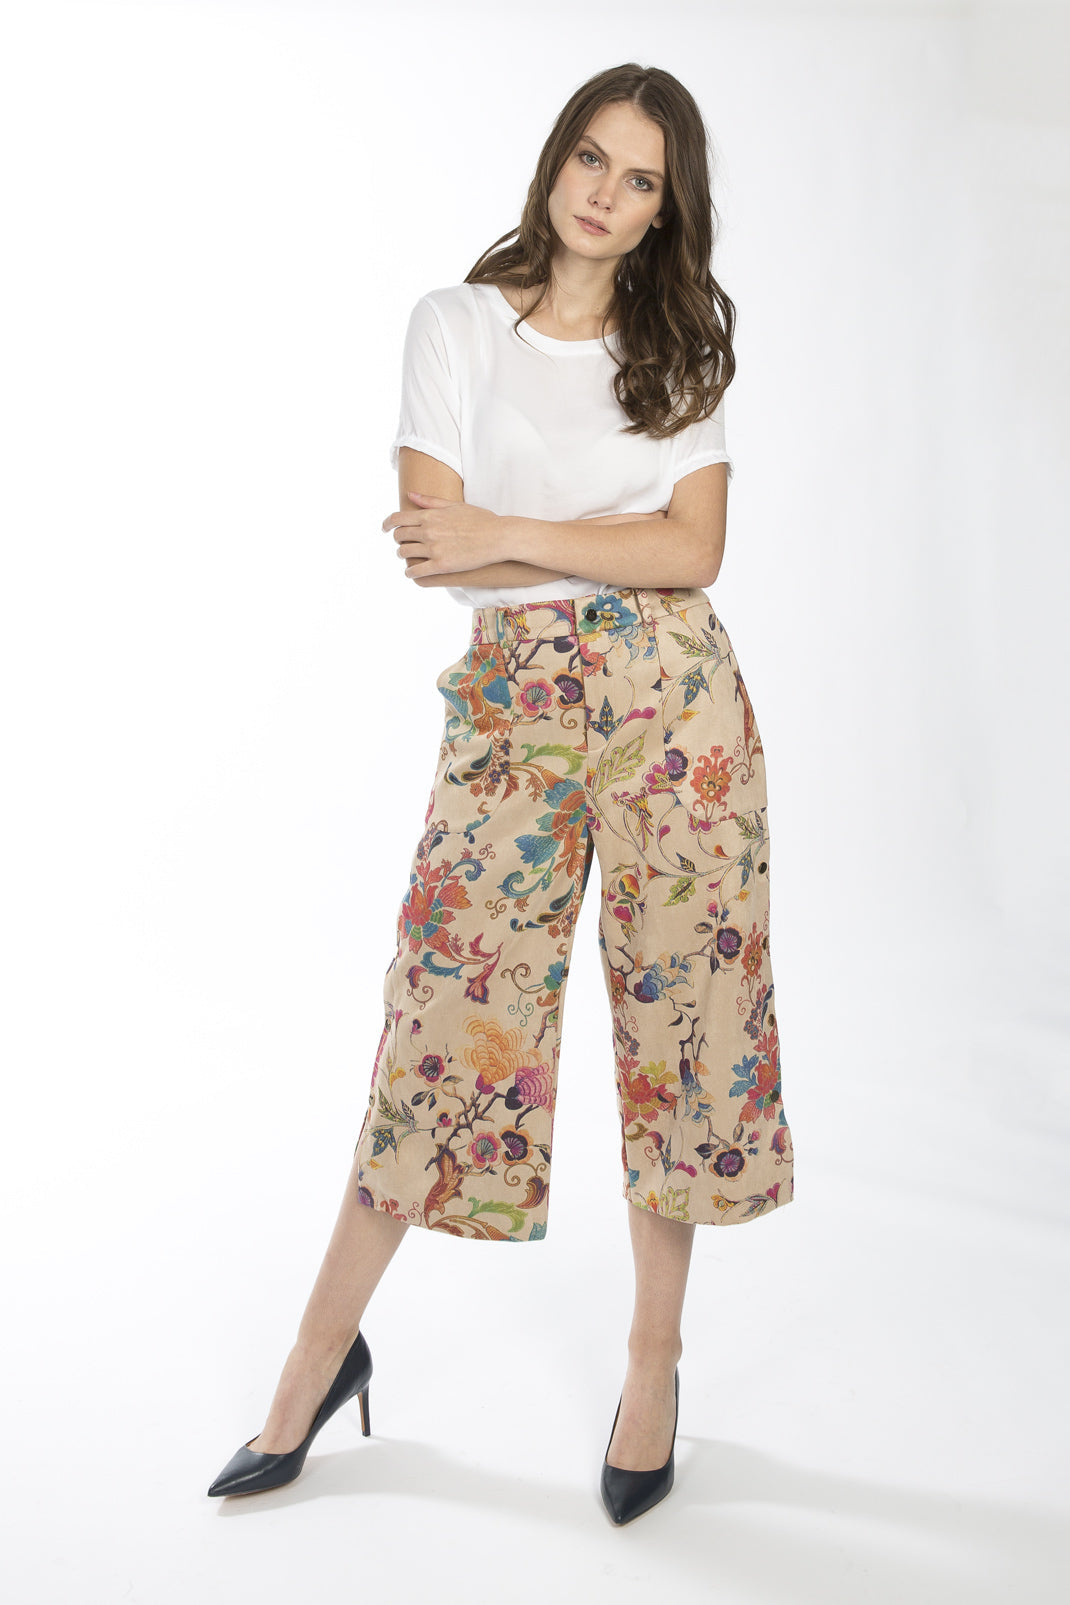 SUXTS145A-09 - Faux Suede Digital Print Trousers